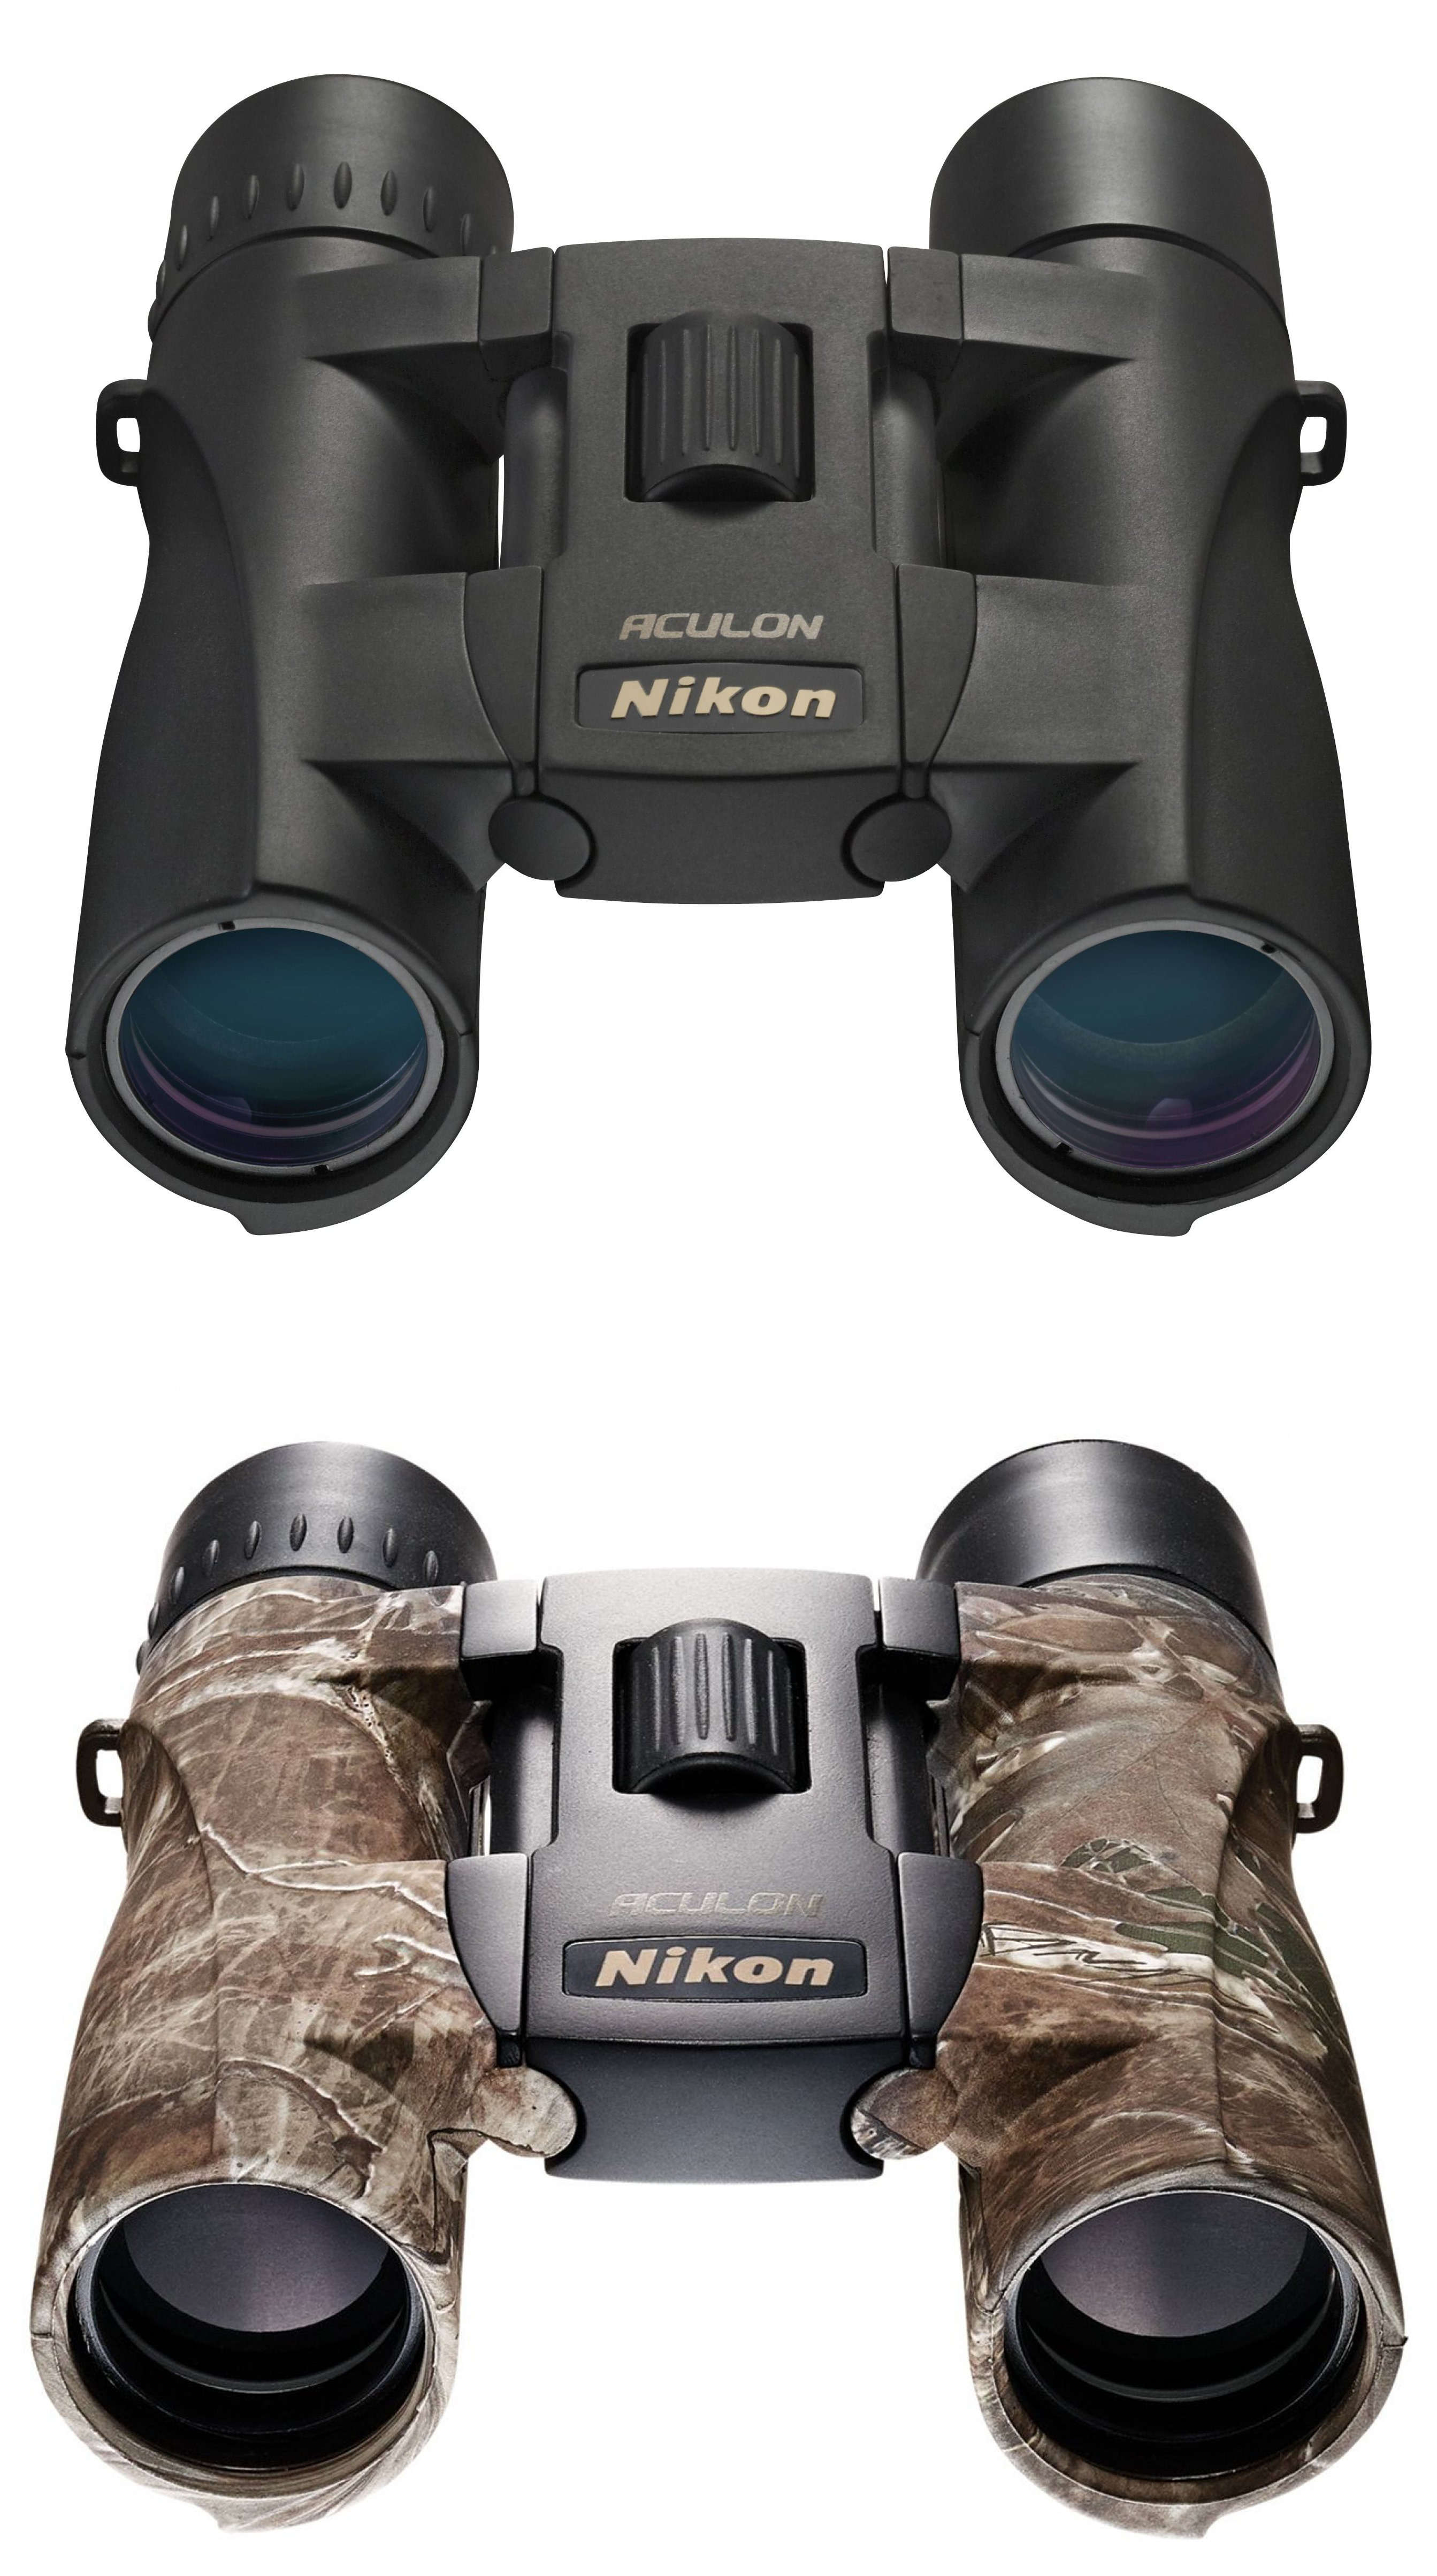 Nikon Aculon A30 10x25mm Roof Prism Binoculars | Up to 26% Off 4.4 Star  Rating w/ Free Shipping and Handling